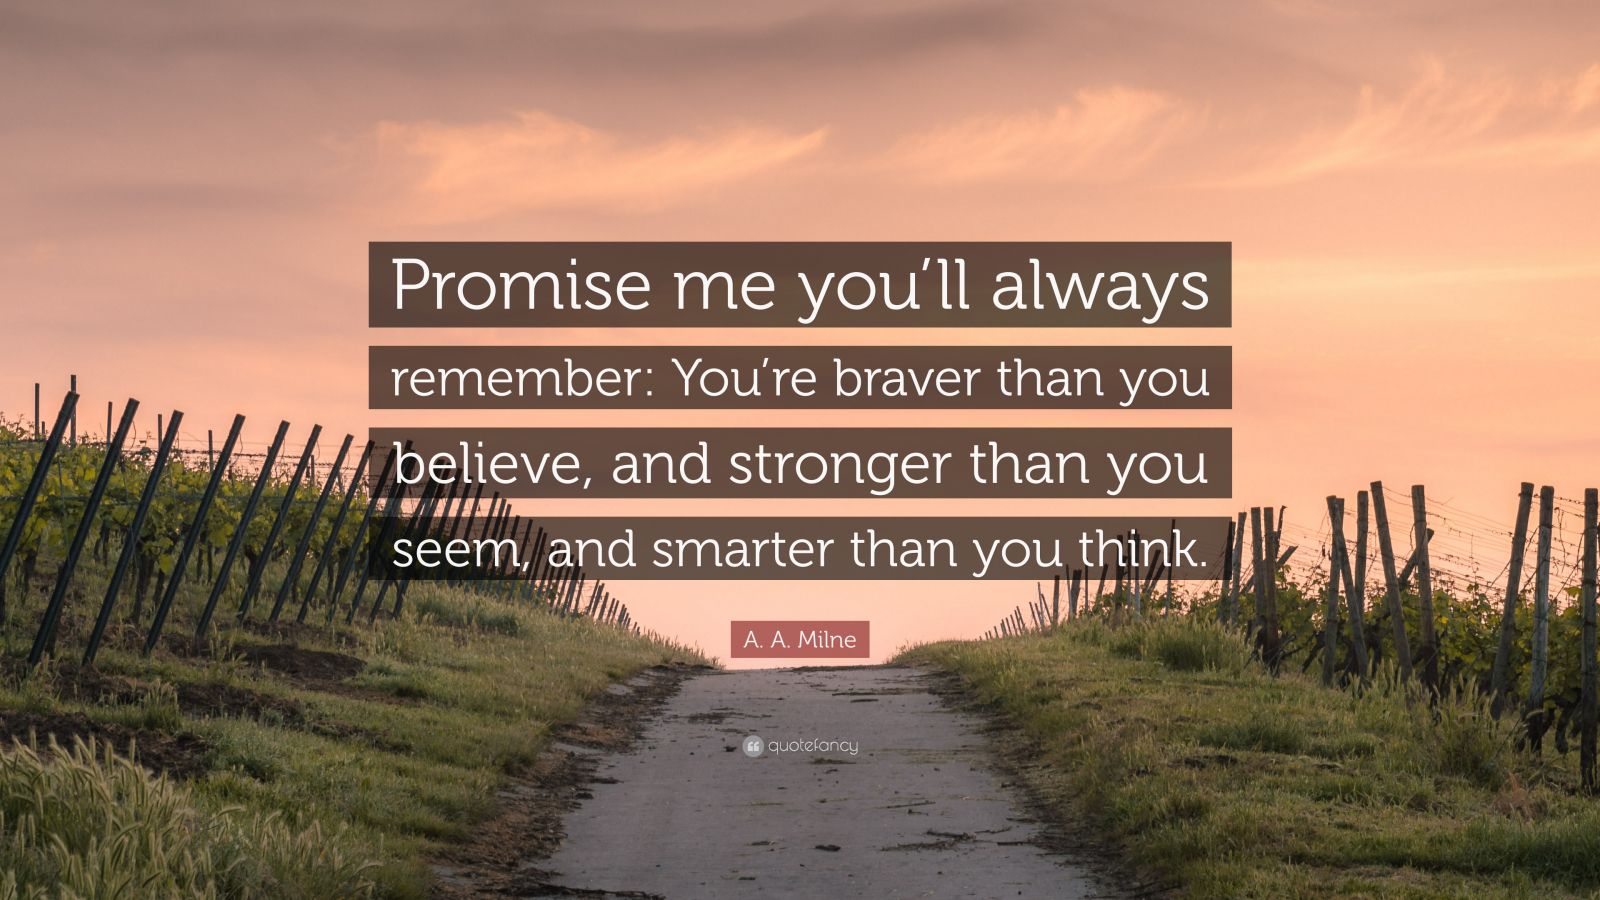 A A Milne Quote “promise Me Youll Always Remember Youre Braver Than You Believe And 2133